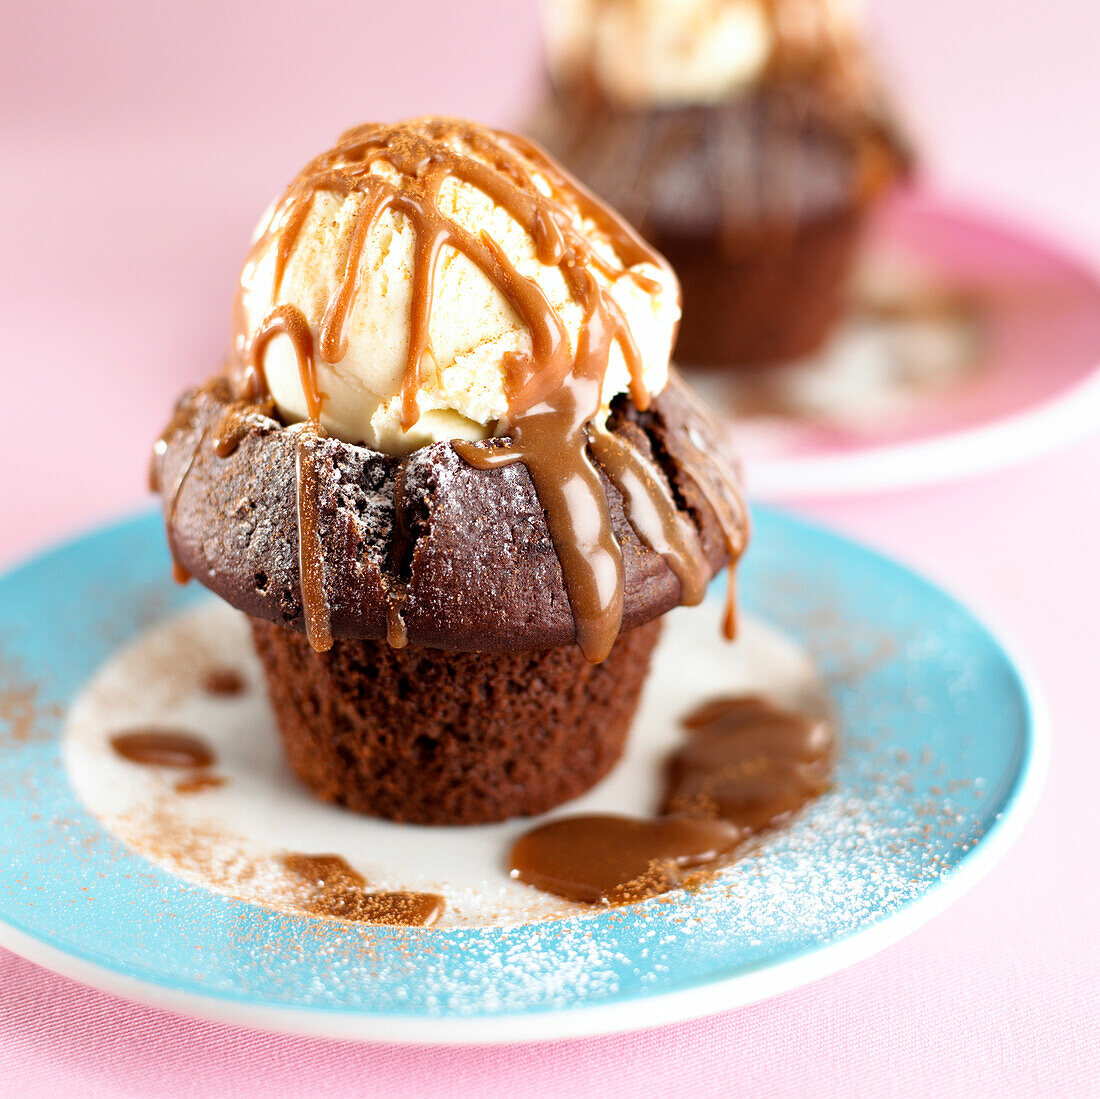 Chocolate muffin on plate with ice cream and sauce on top